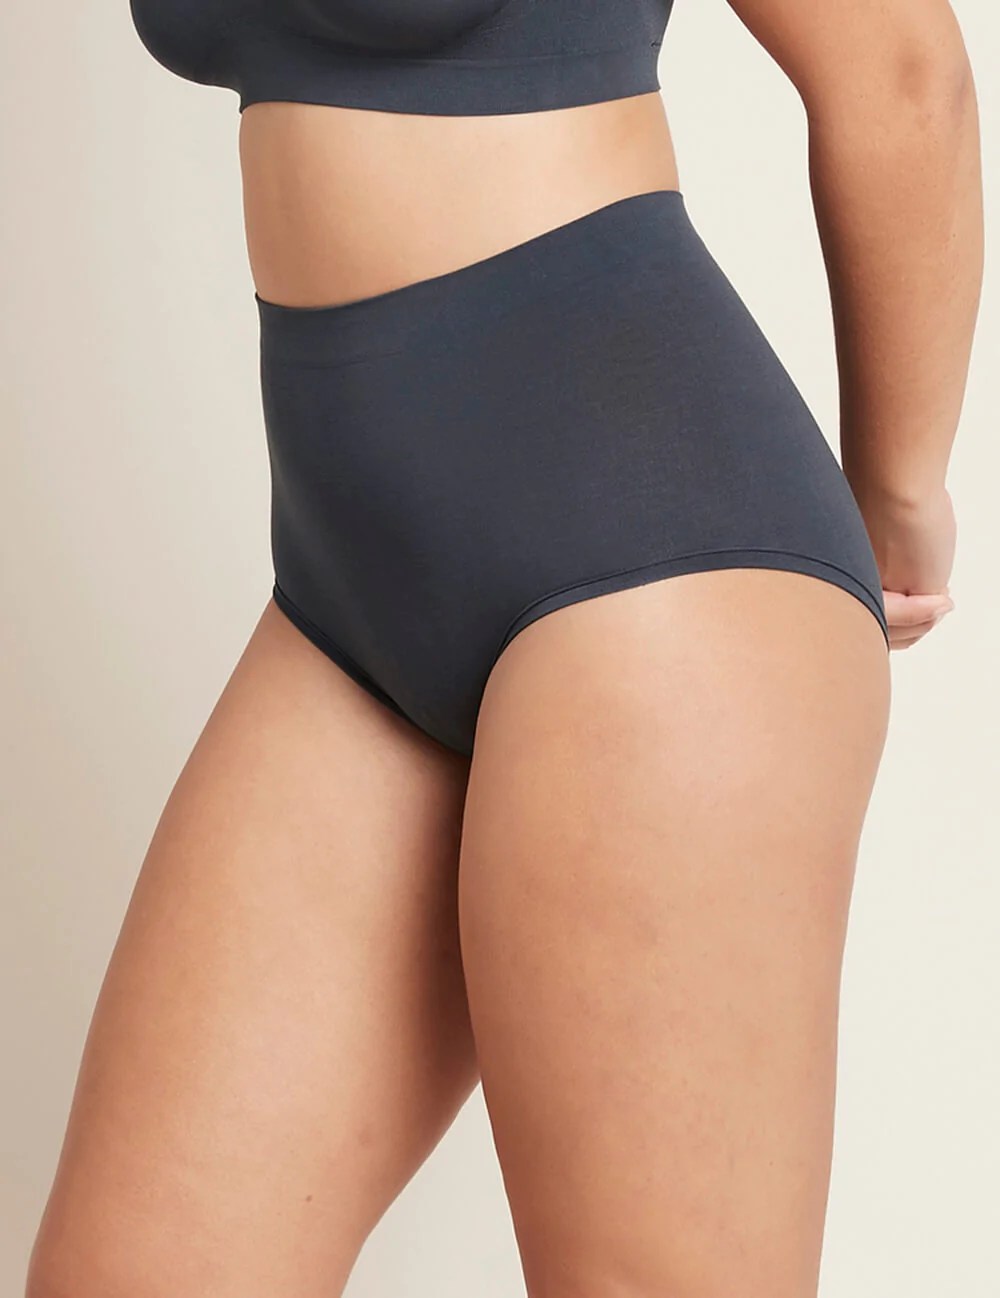 Best Underwear for Exercise - A Gynecologist's Advice